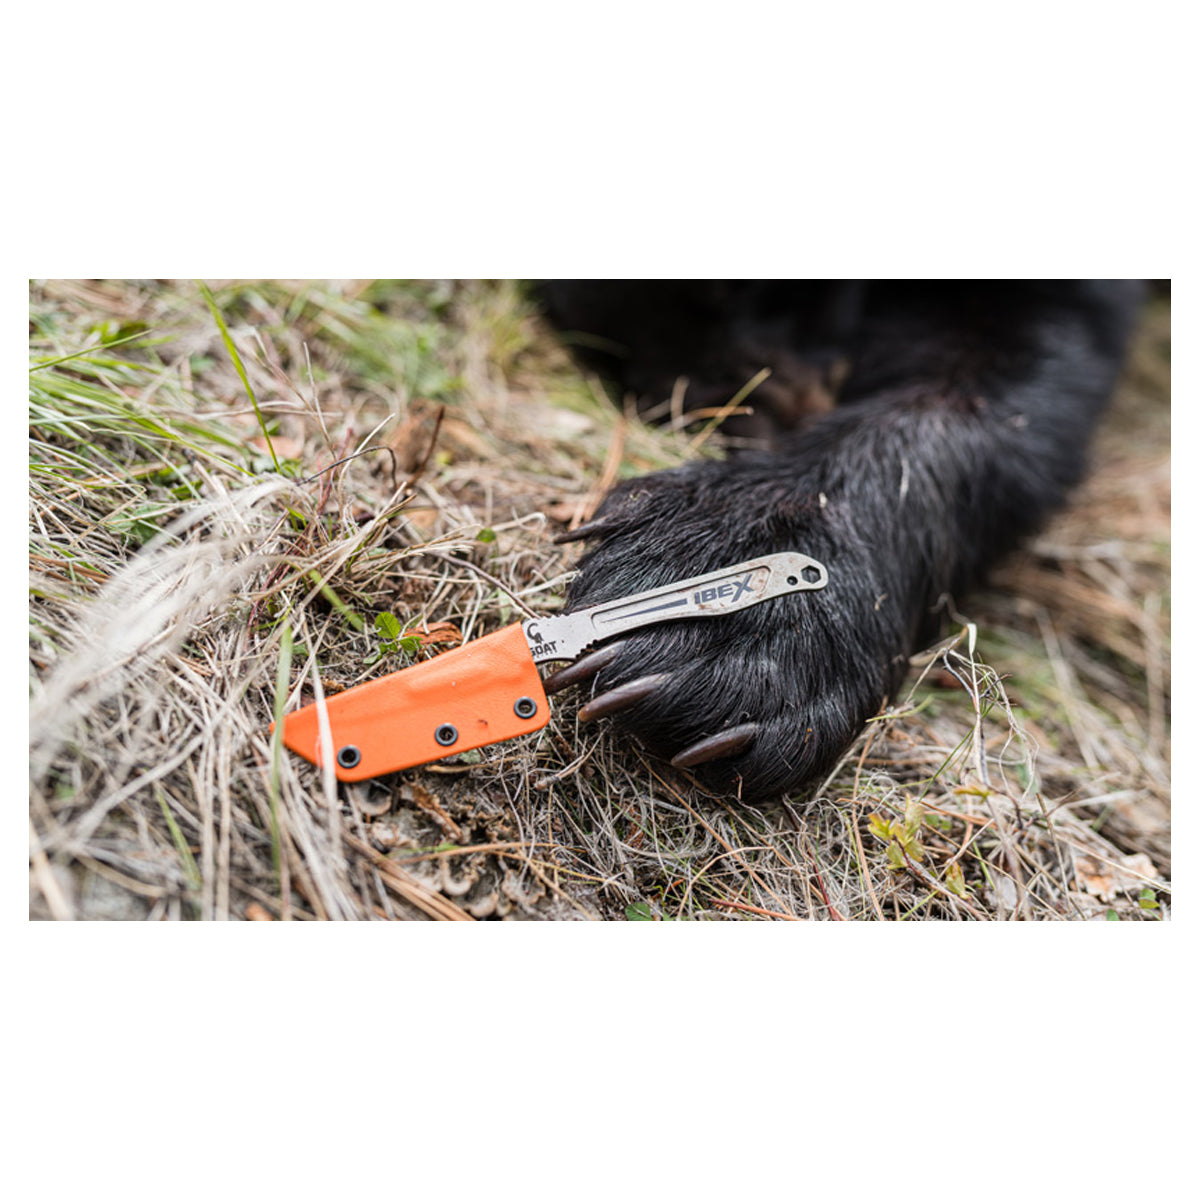 Goat Knives Ibex Mini Replaceable Blade Knife in  by GOHUNT | Goat Knives - GOHUNT Shop